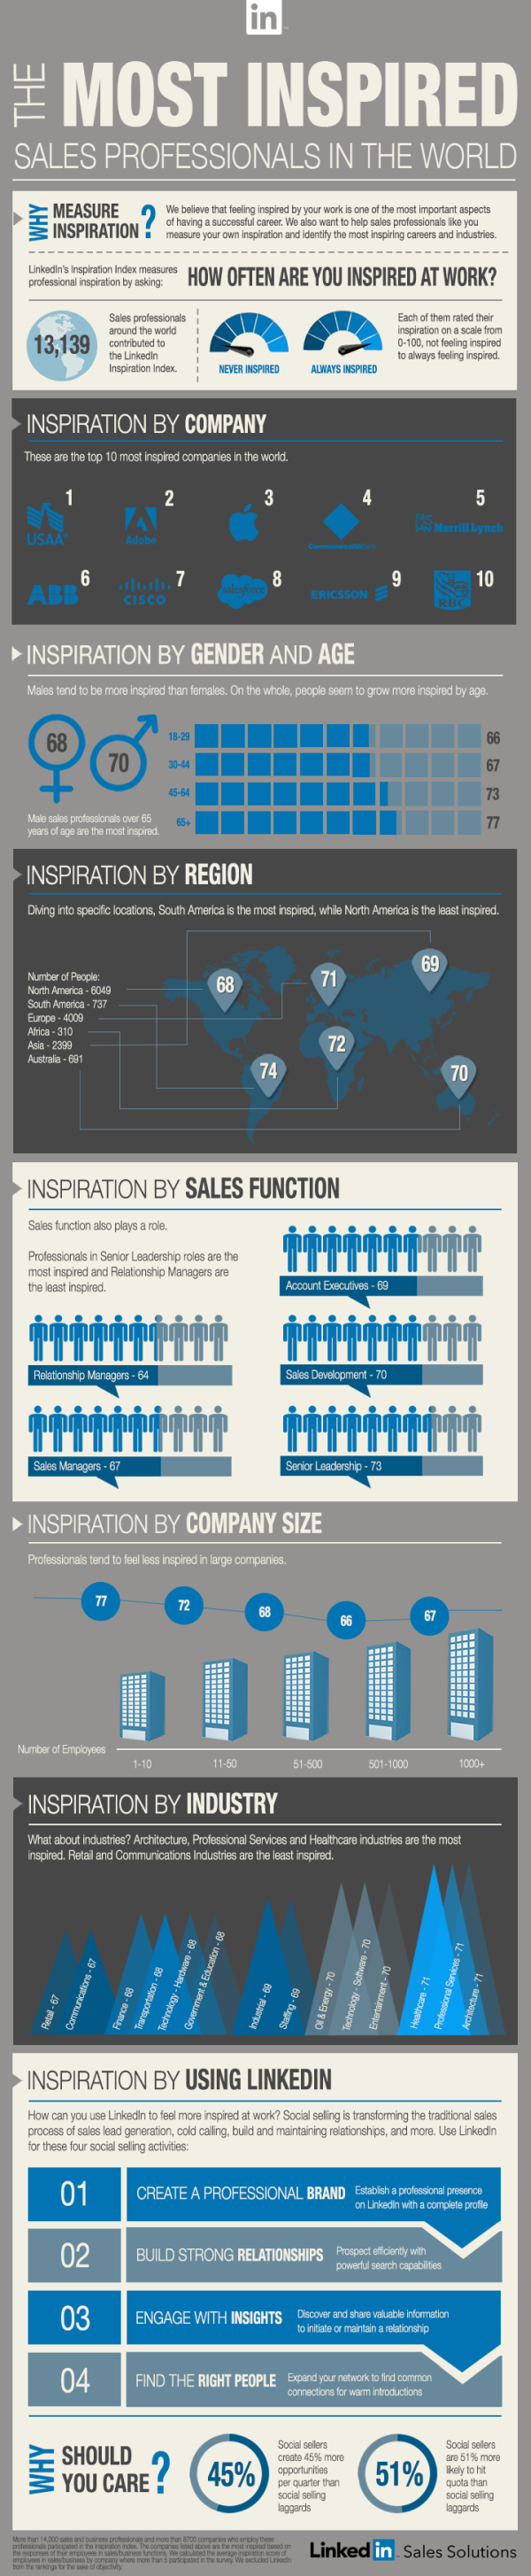 sales infographic by LinkedIn